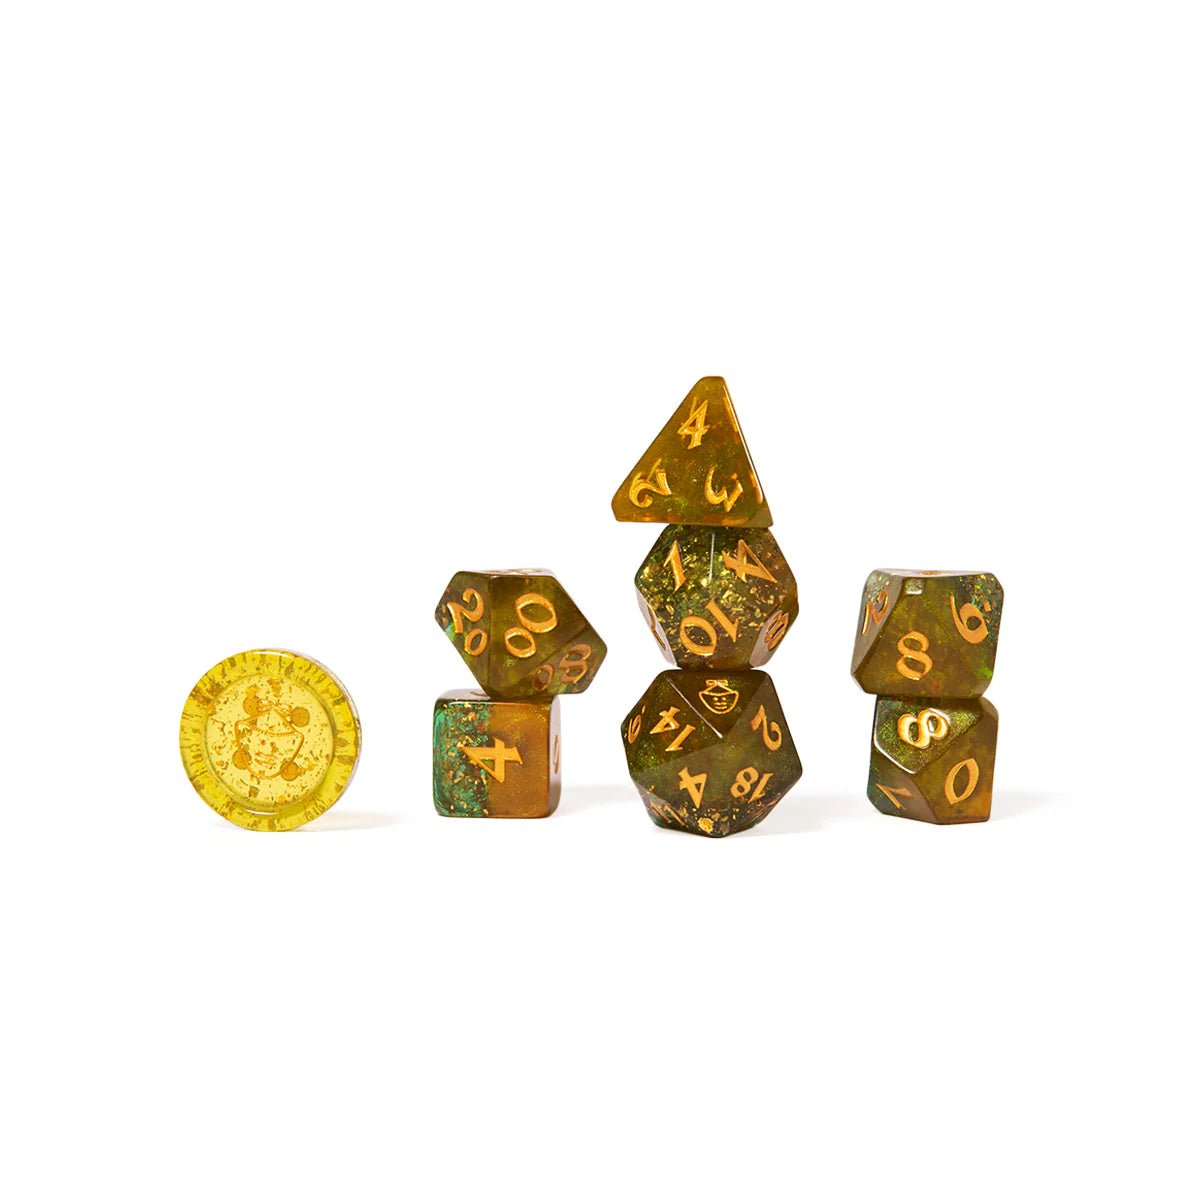 Mighty Nein Dice Set: Nott the Brave (Yellow/Green) - The Fourth Place